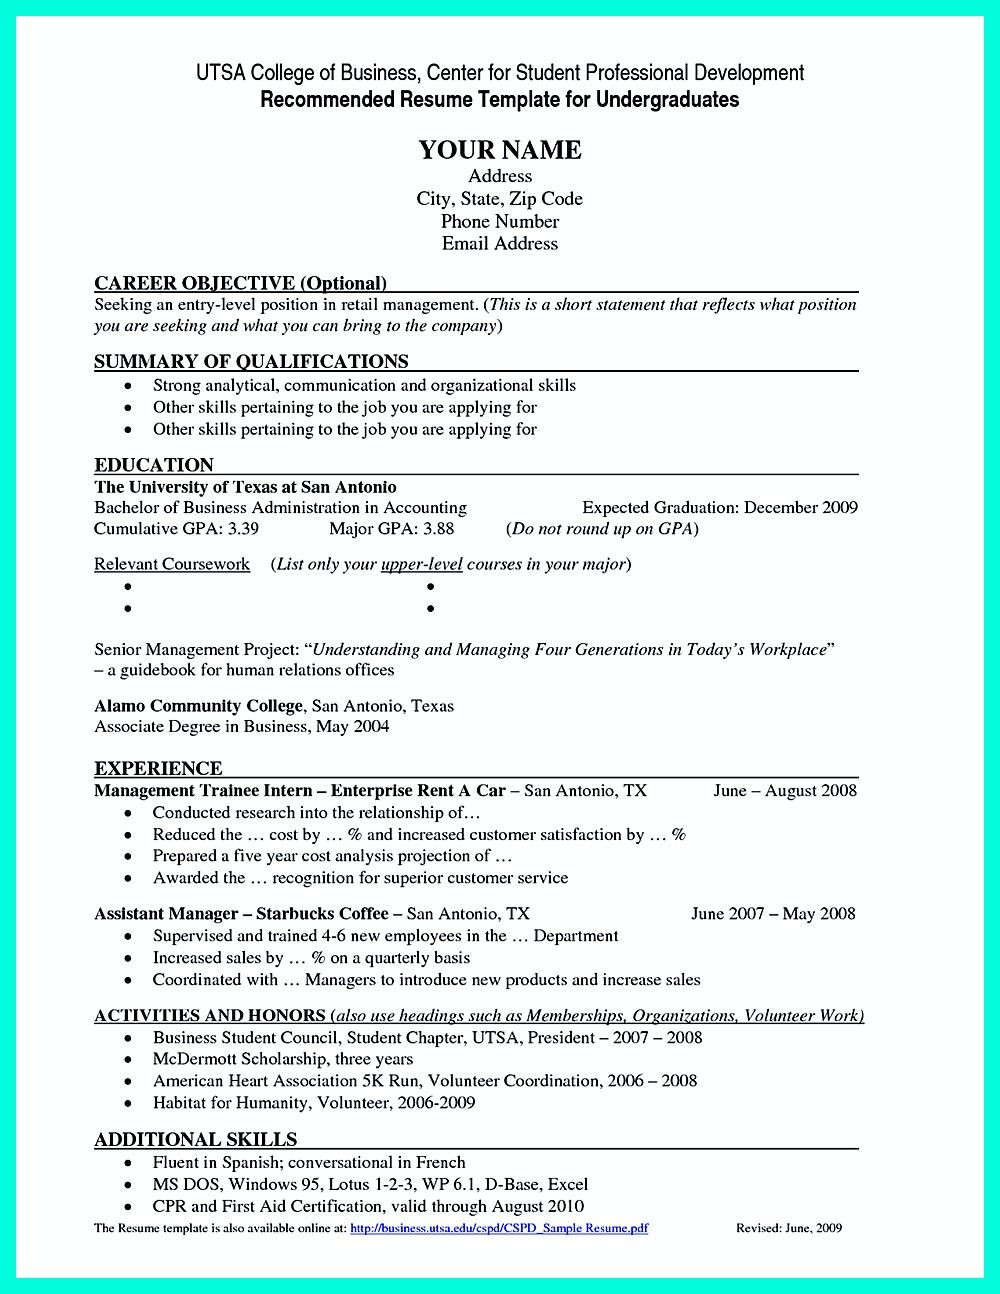 Sample Resume for Graduate assistant Position Best Current College Student Resume with No Experience Job …